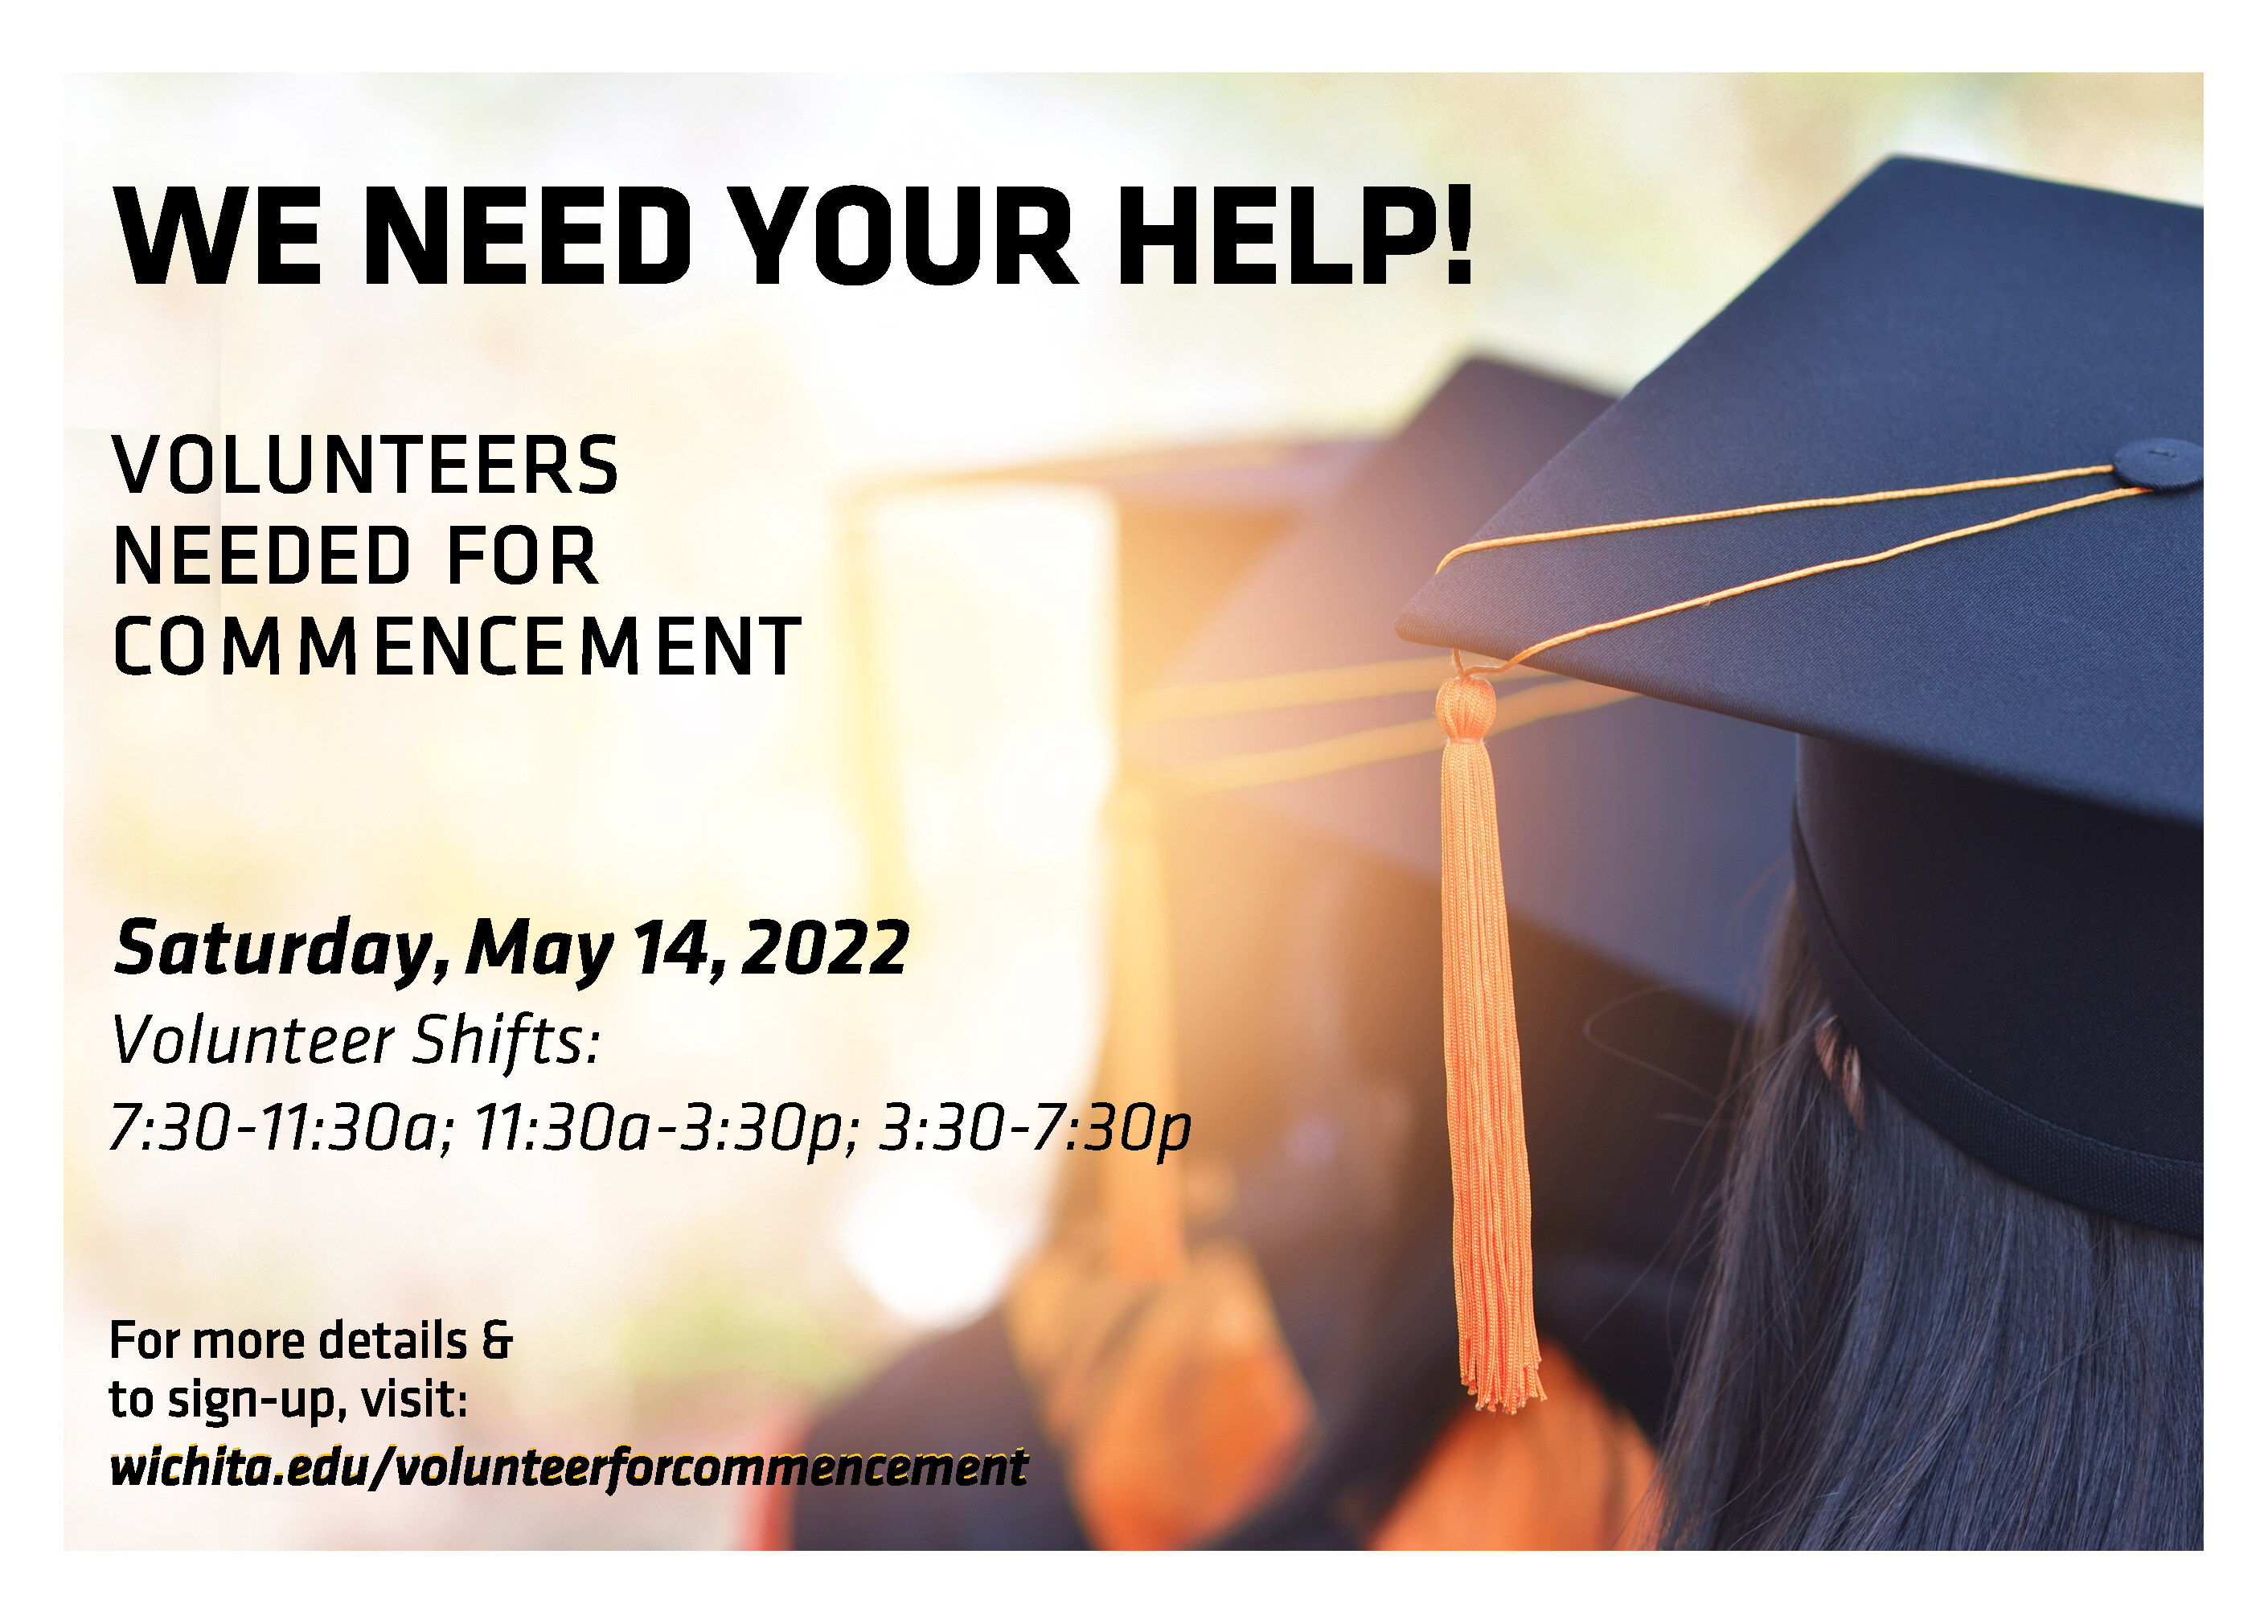 An image featuring the backs of graduates with graduation caps on. Black text on the left-hand side reads: "We need your help! Volunteers needed for commencement. Saturday, May 14, 2022. Volunteer Shifts: 7:30-11:30a; 11:30-3:30p; 3:30-7:30p. For more details & to sign-up visit: wichita.edu/volunteerforcommencement."